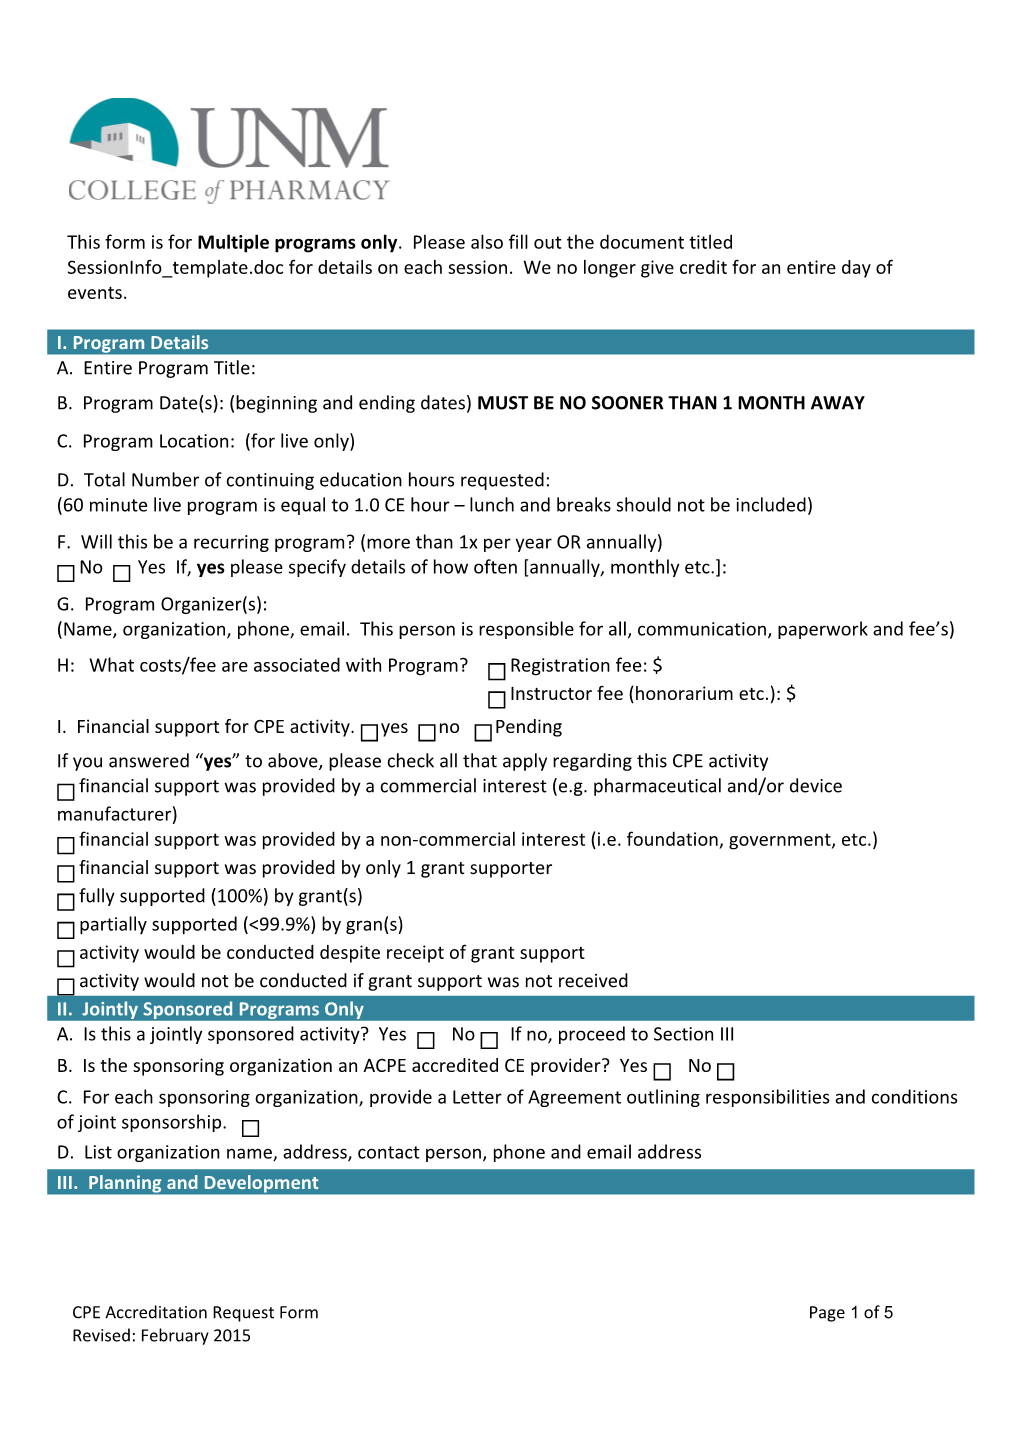 CPE Accreditation Request Form Page 3 of 3